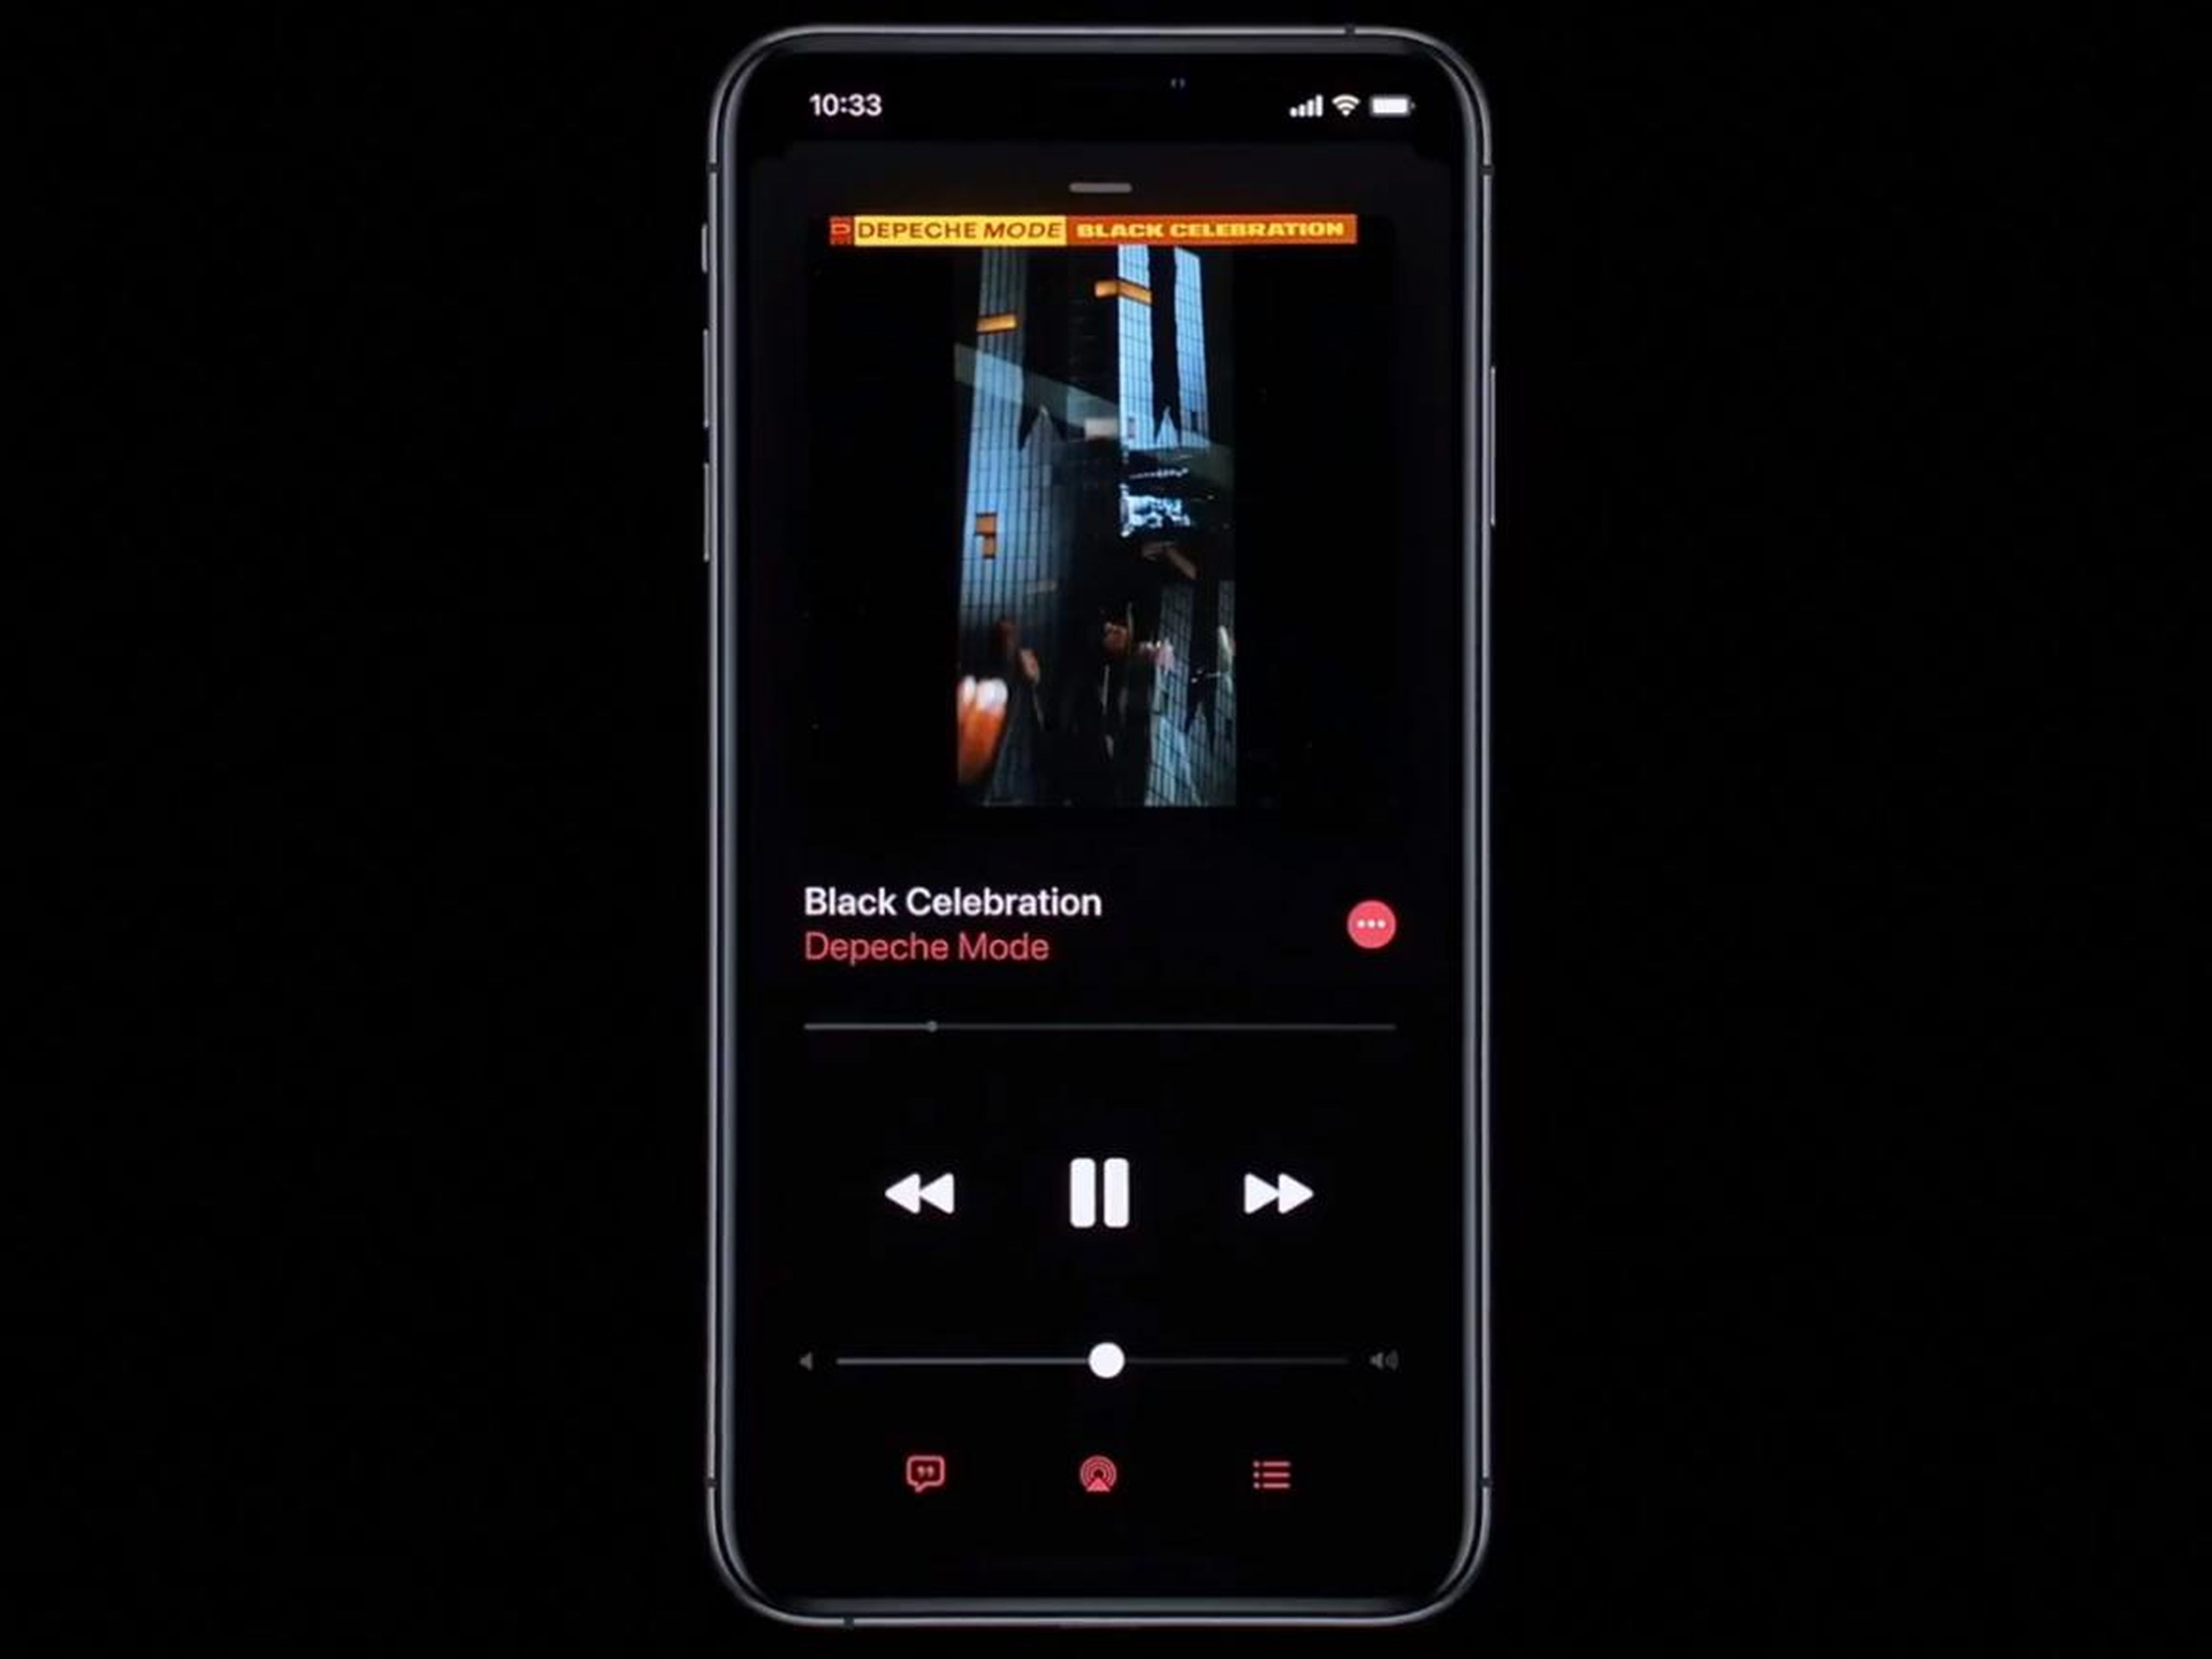 And here's Apple Music in another view.